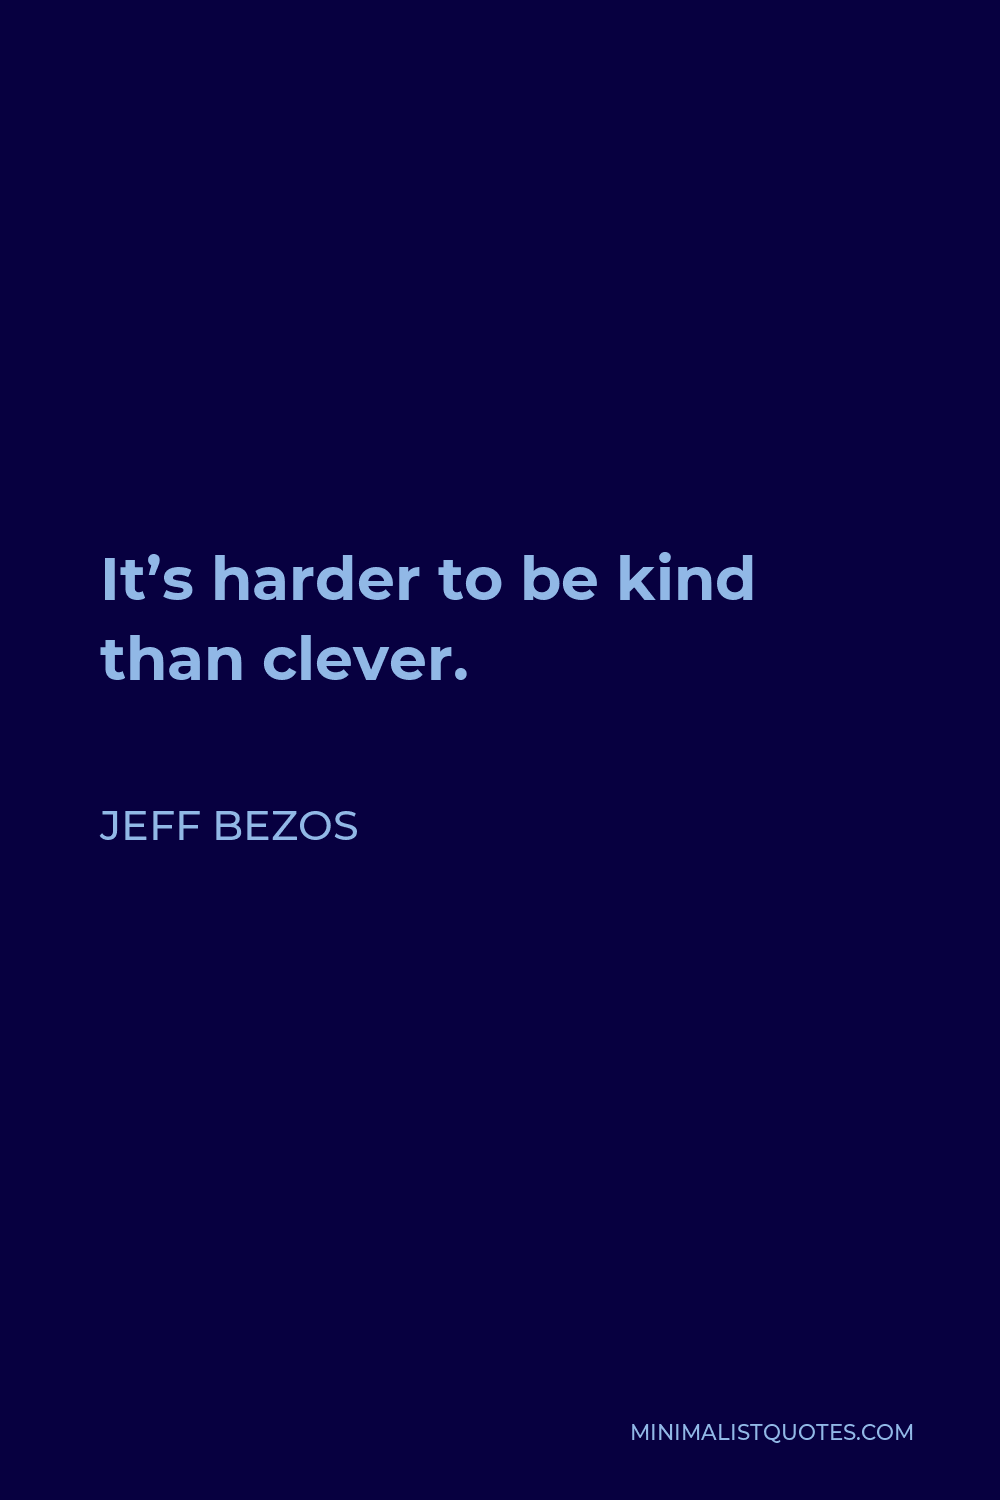 Jeff Bezos Quote - It’s harder to be kind than clever.